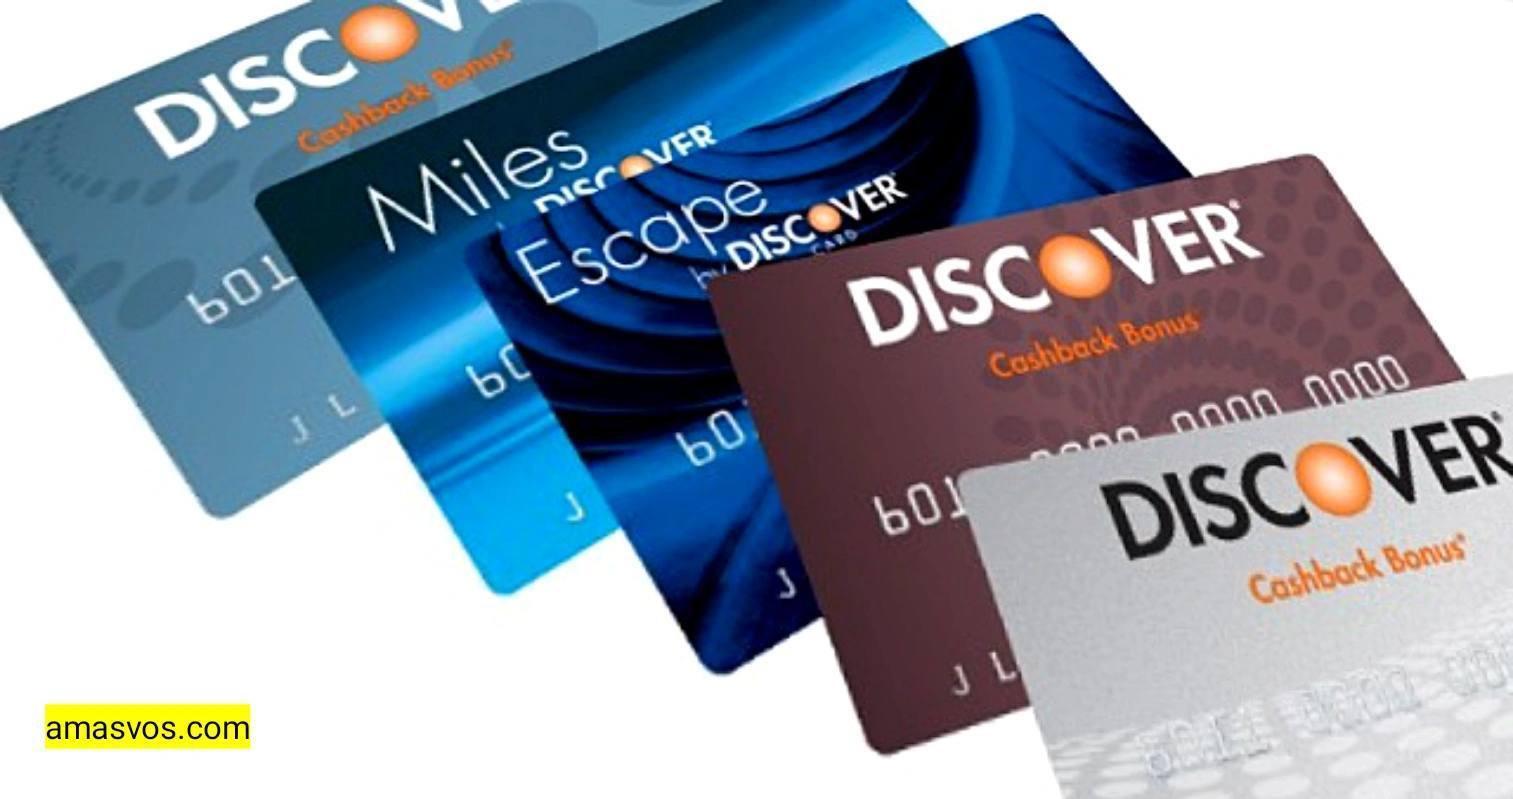 Why Is Discover Card A Joke